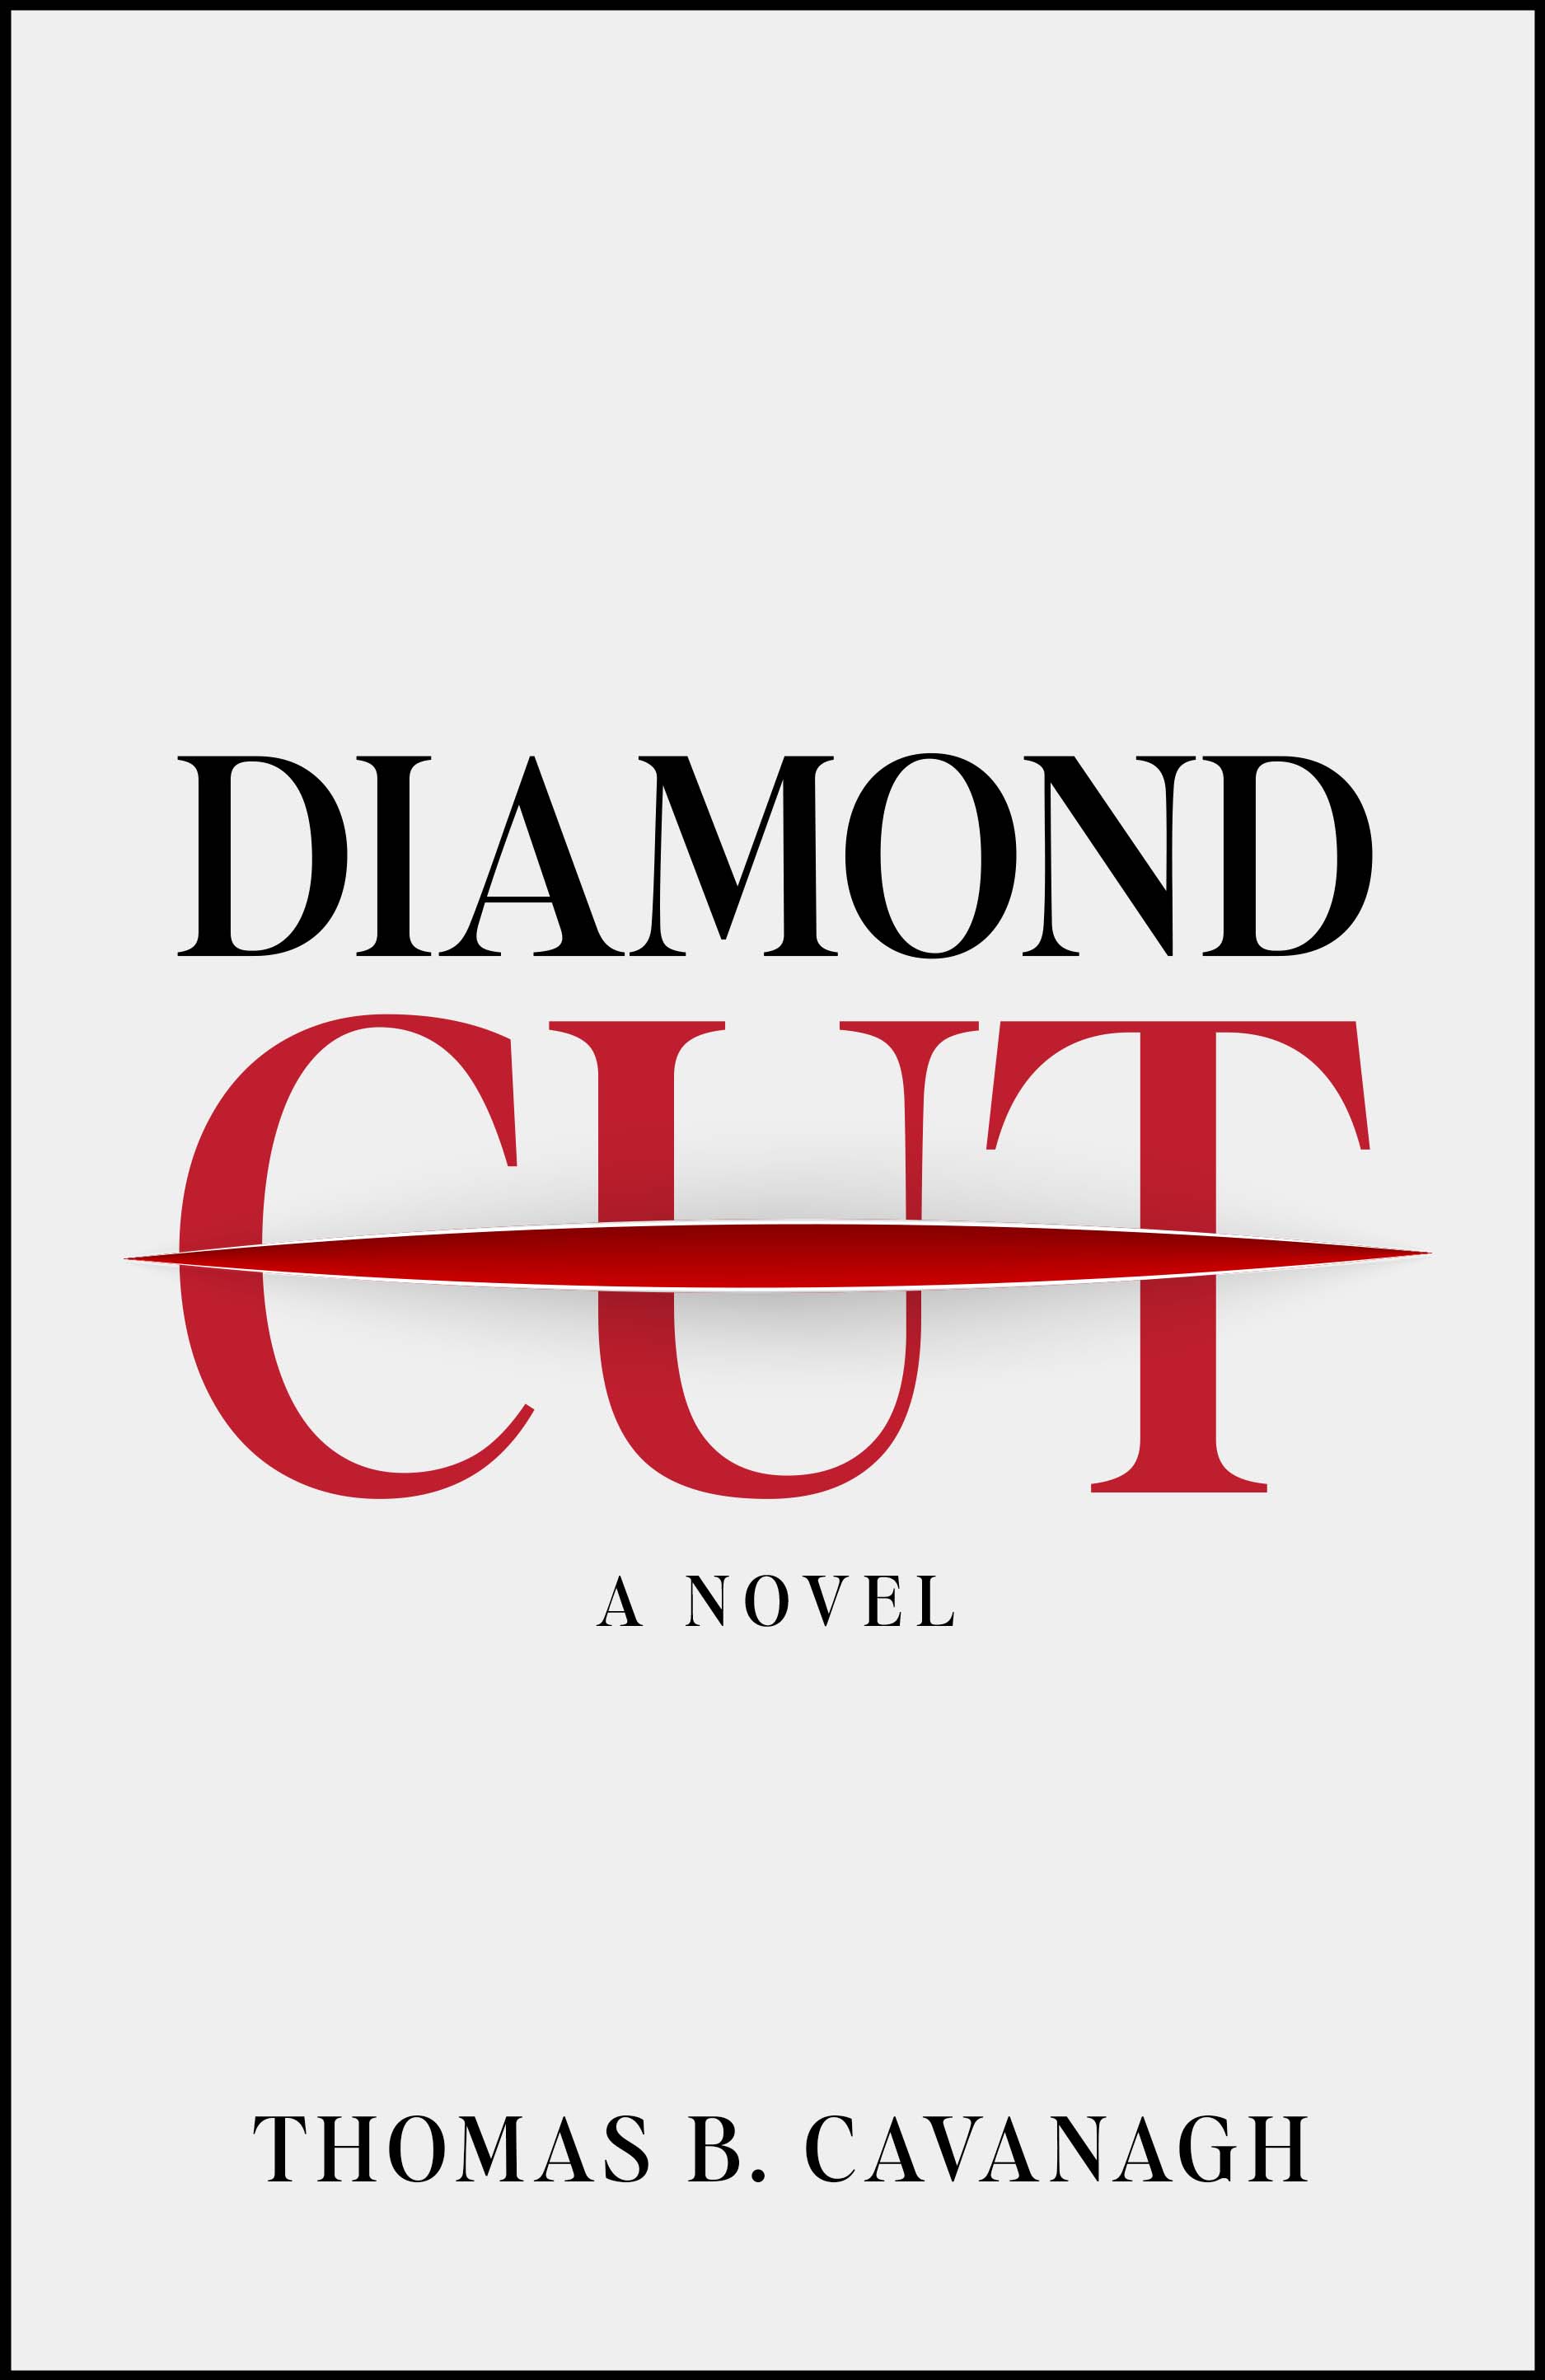 Cover of Diamond Cut a novel by Thomas B. Cavanagh, black and red text on white background